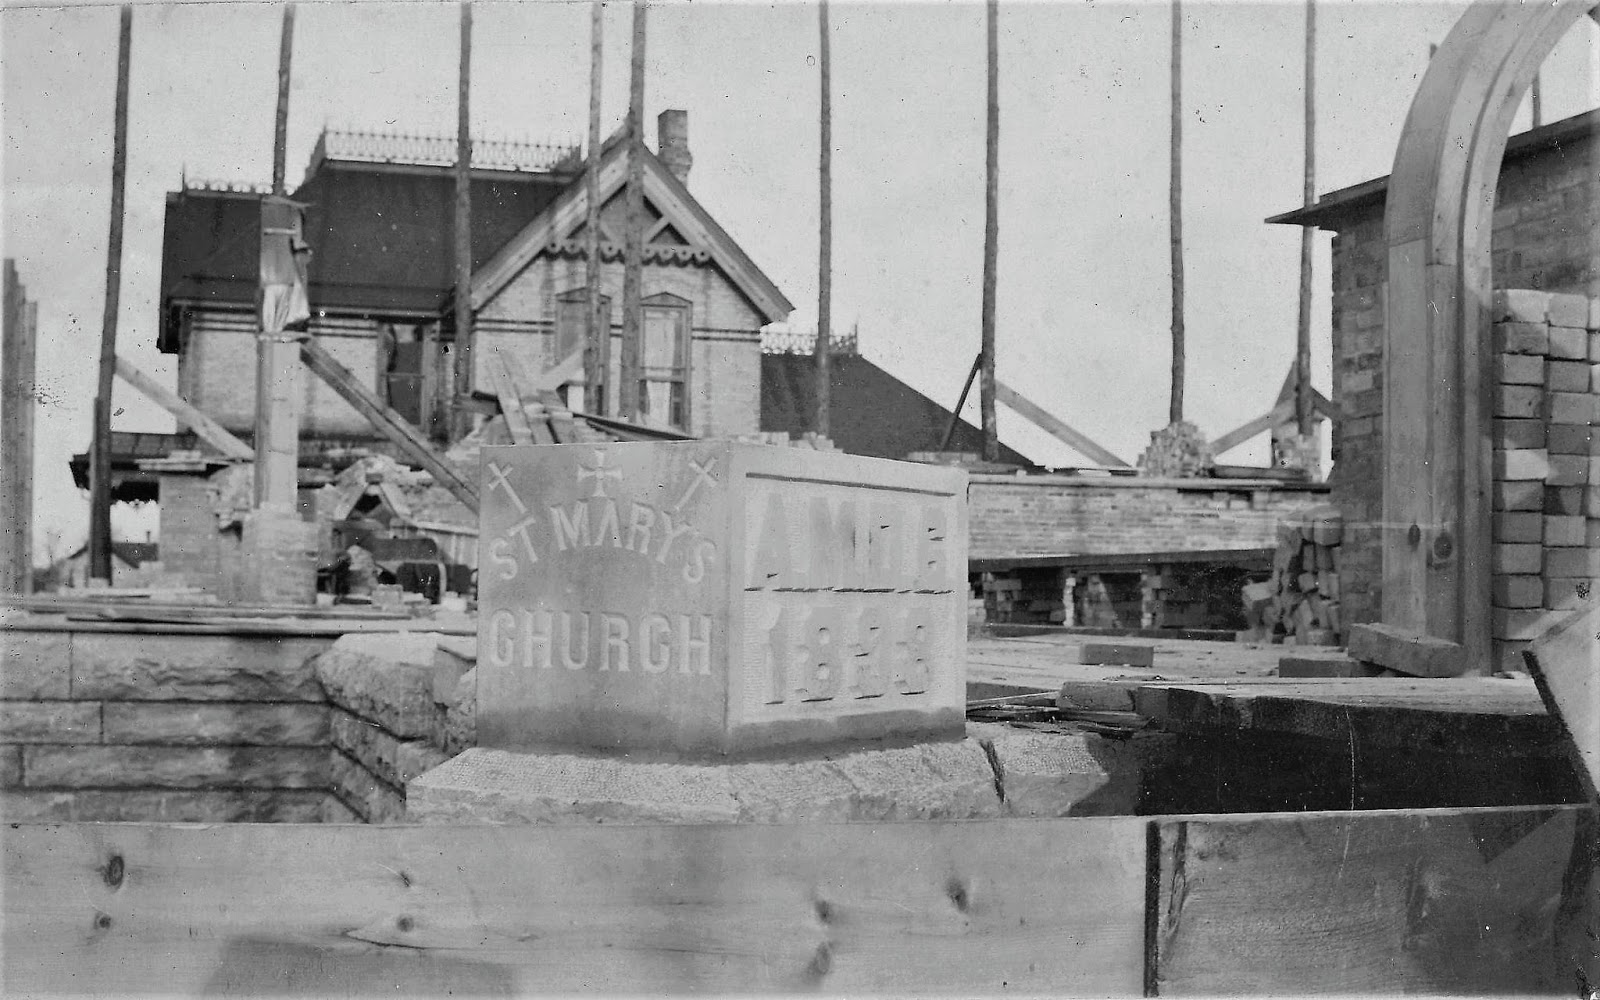 The corner stone for the new St. Mary's Church was set in 1898. Kaukauna Times photo.